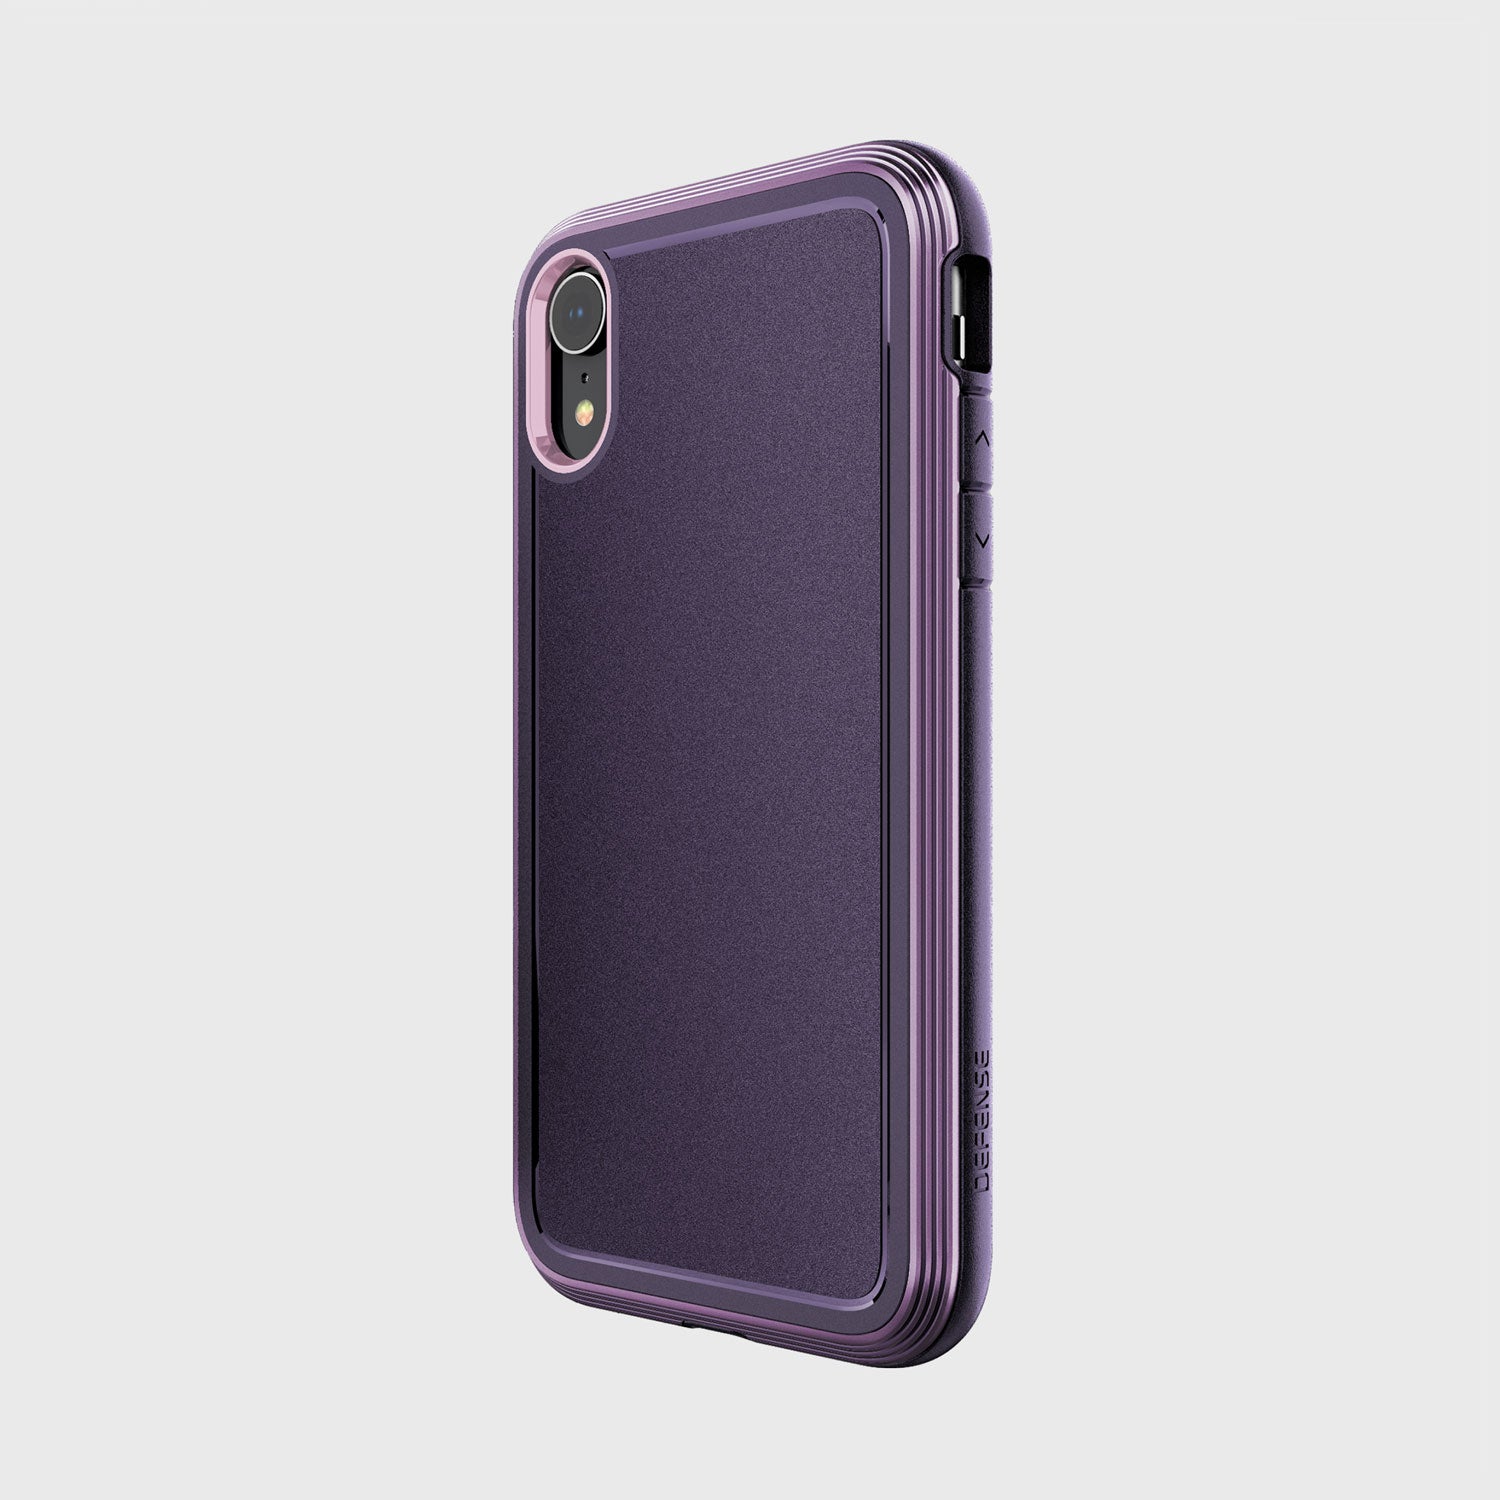 An iPhone XR case in purple, the Raptic ULTRA, providing device protection, displayed on a white background.